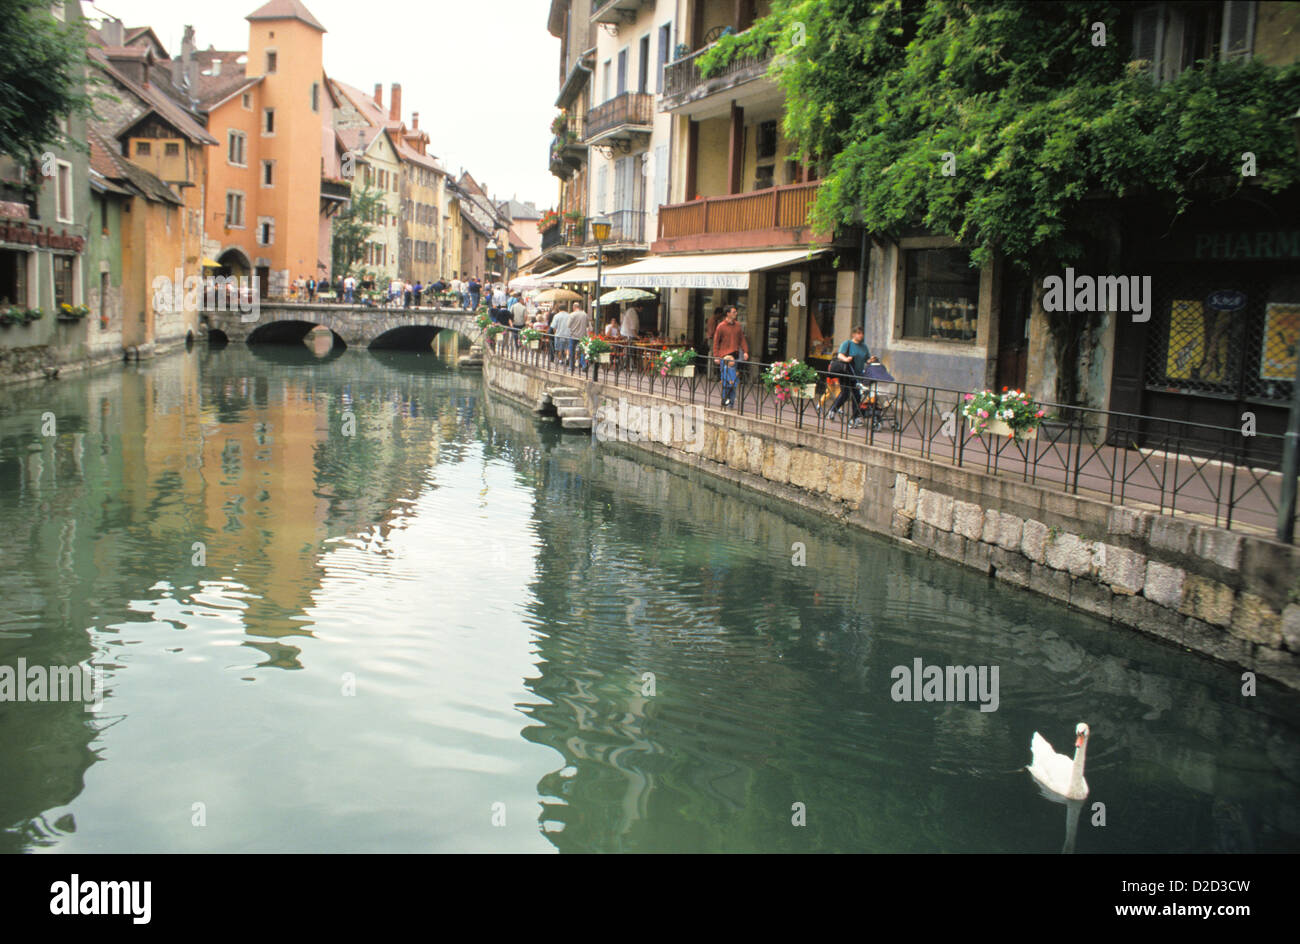 France, Haute-Savoie, Annecy. Street Scene Along The Thiou River. Stock Photo